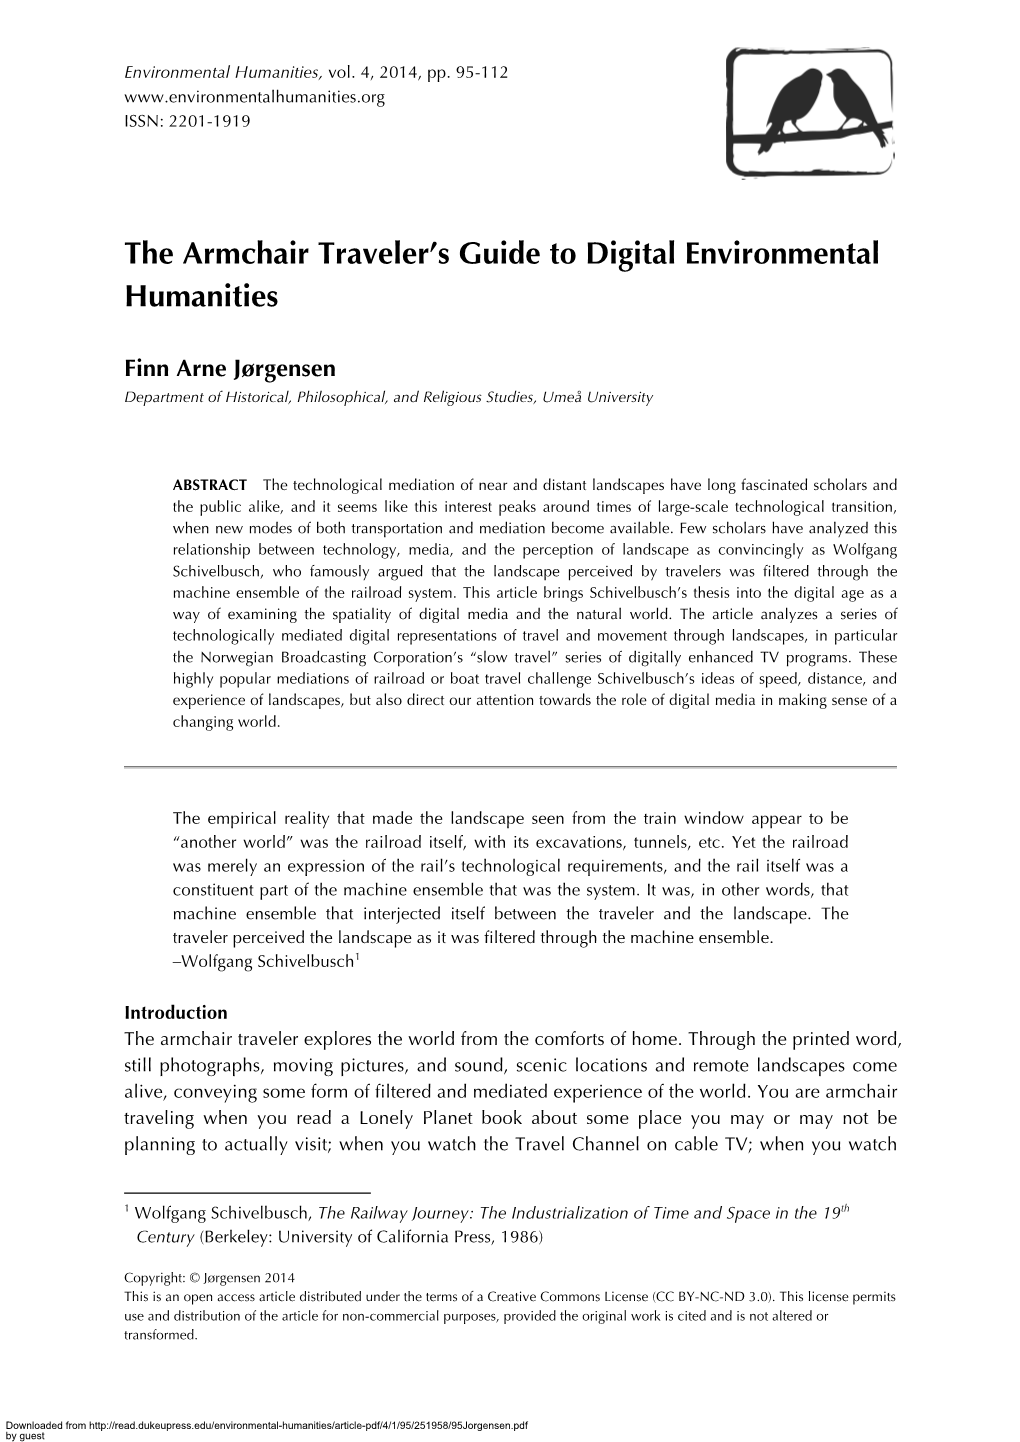 The Armchair Traveler's Guide to Digital Environmental Humanities